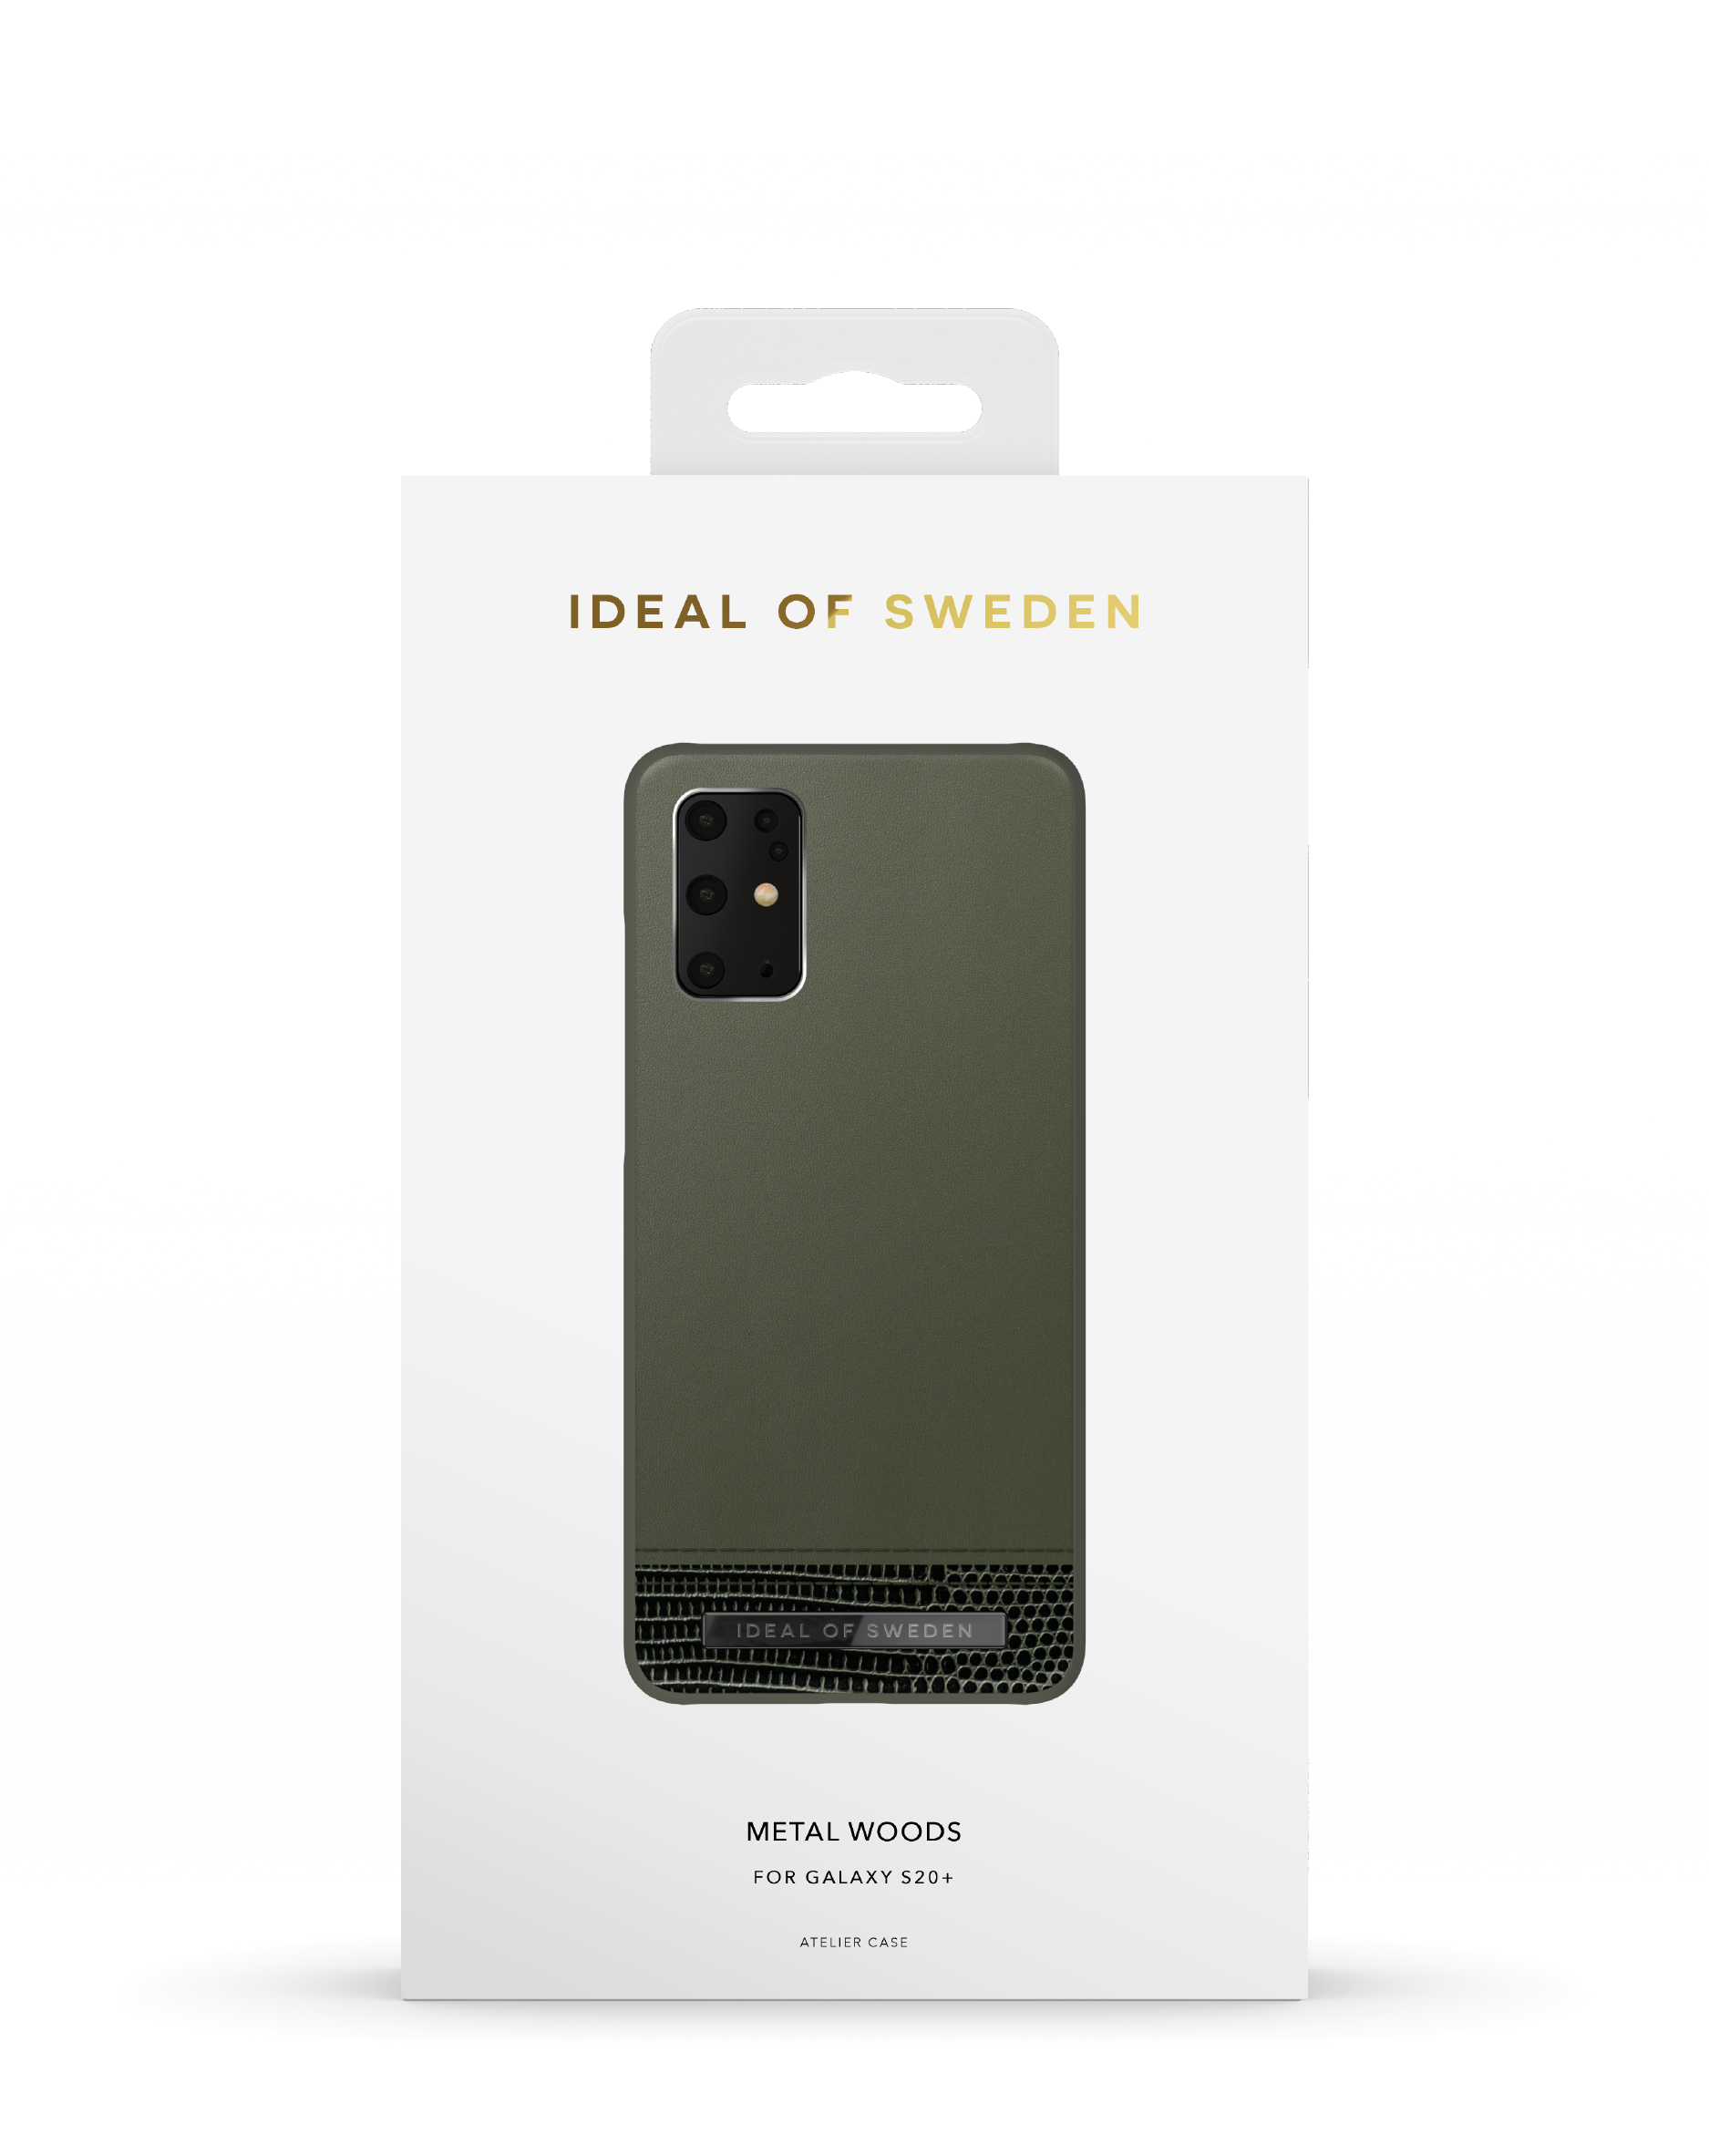 Samsung, OF Ultra, Woods SWEDEN Backcover, IDEAL Galaxy S20 Metal IDACAW20-S11P-235,